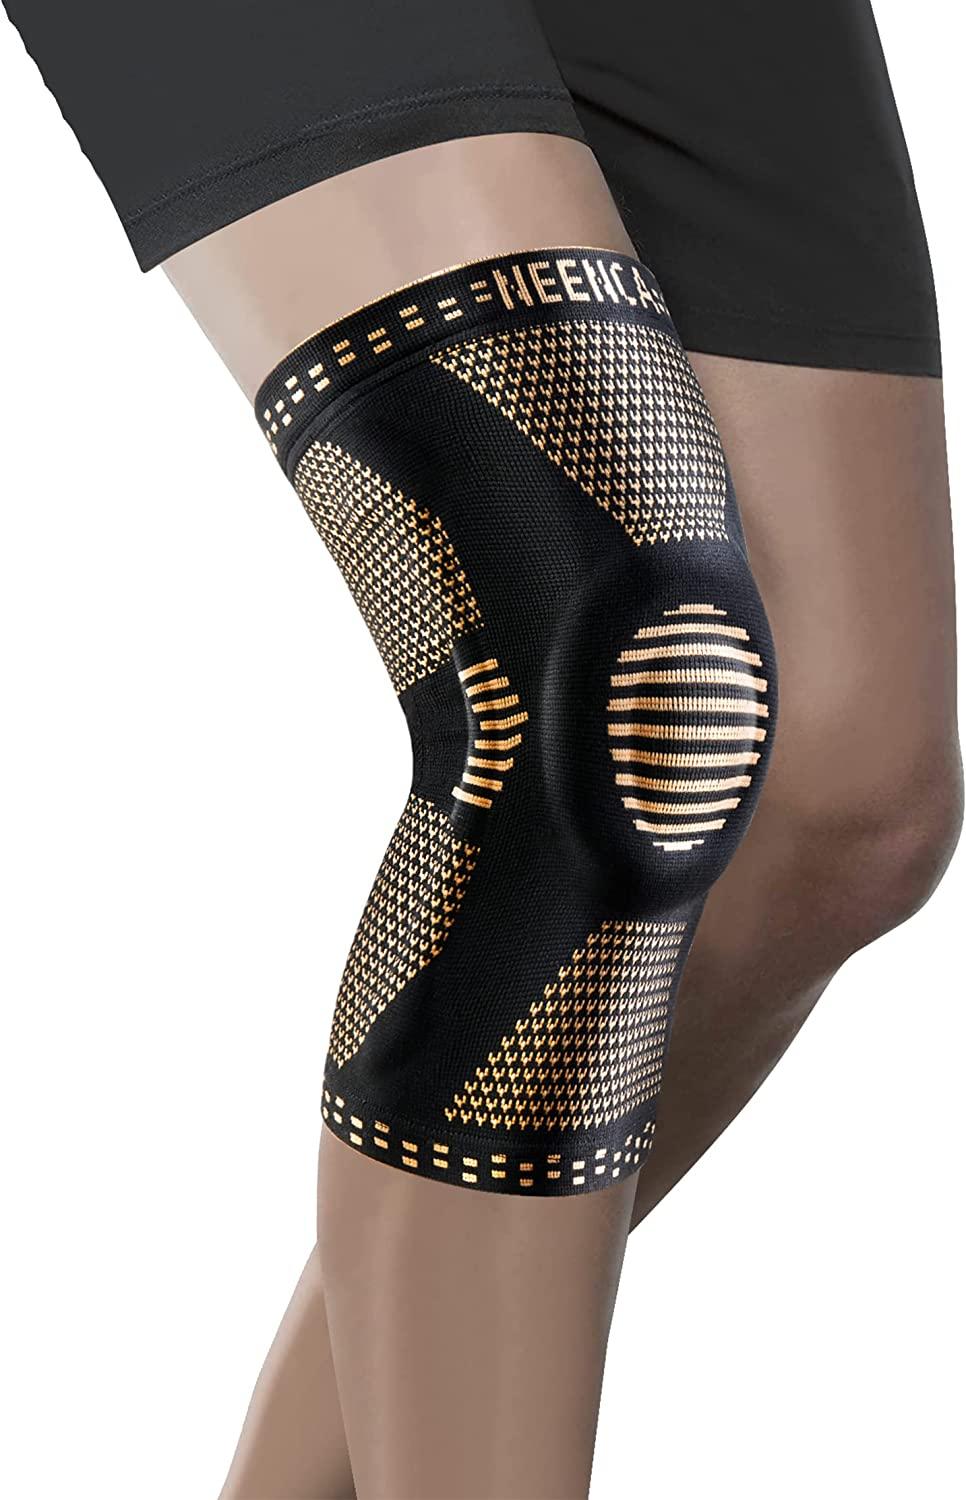 Copper knee braces for knee pain for men and women with Side Stabilizers -  copper compression Knee Sleeve for knee pain,arthritis pain and